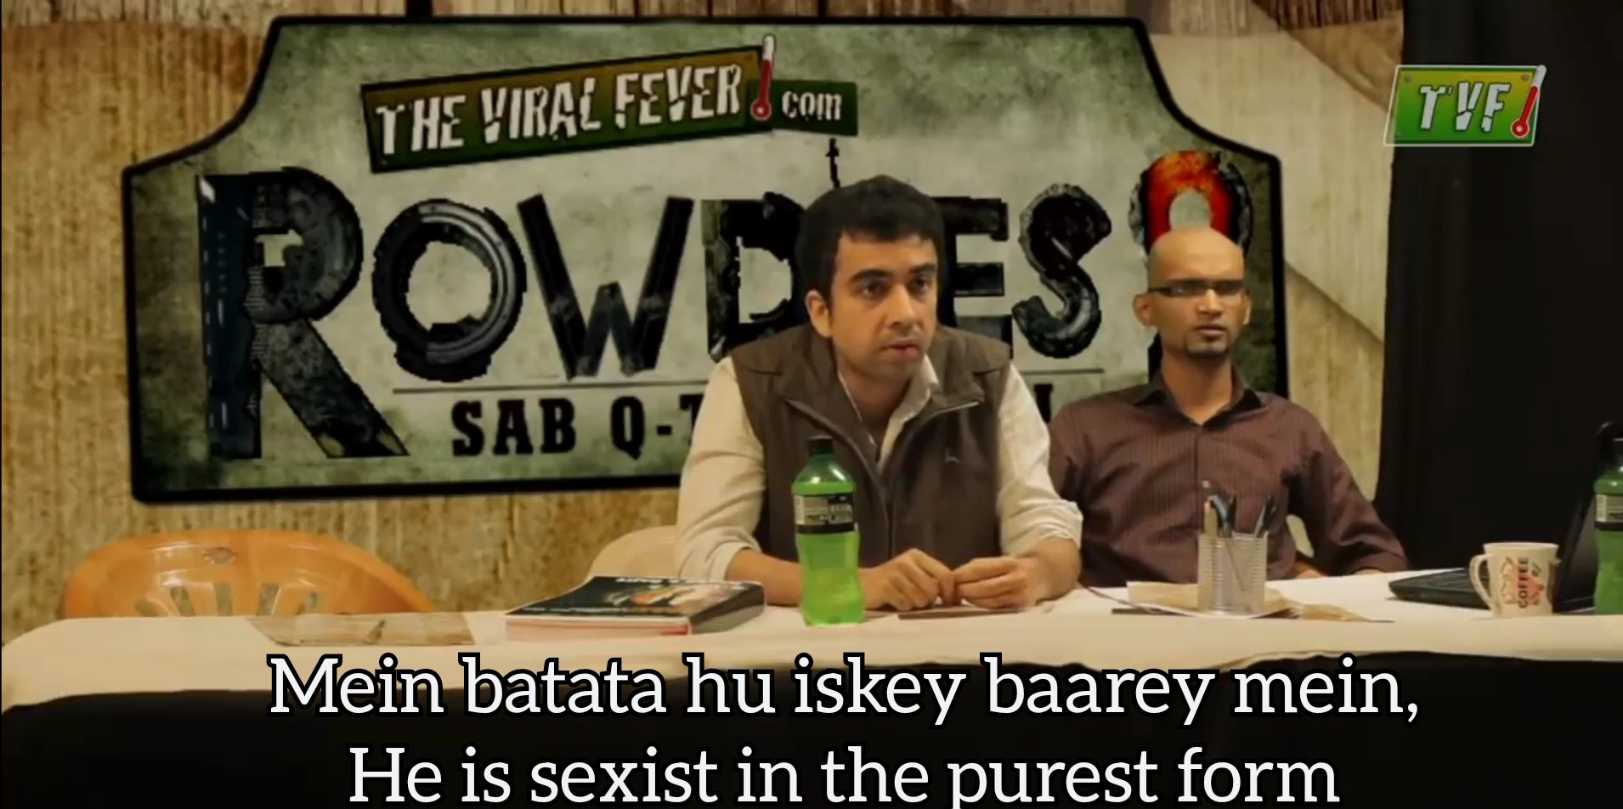 he is sexiest in the purest form tvf rowdies meme templates